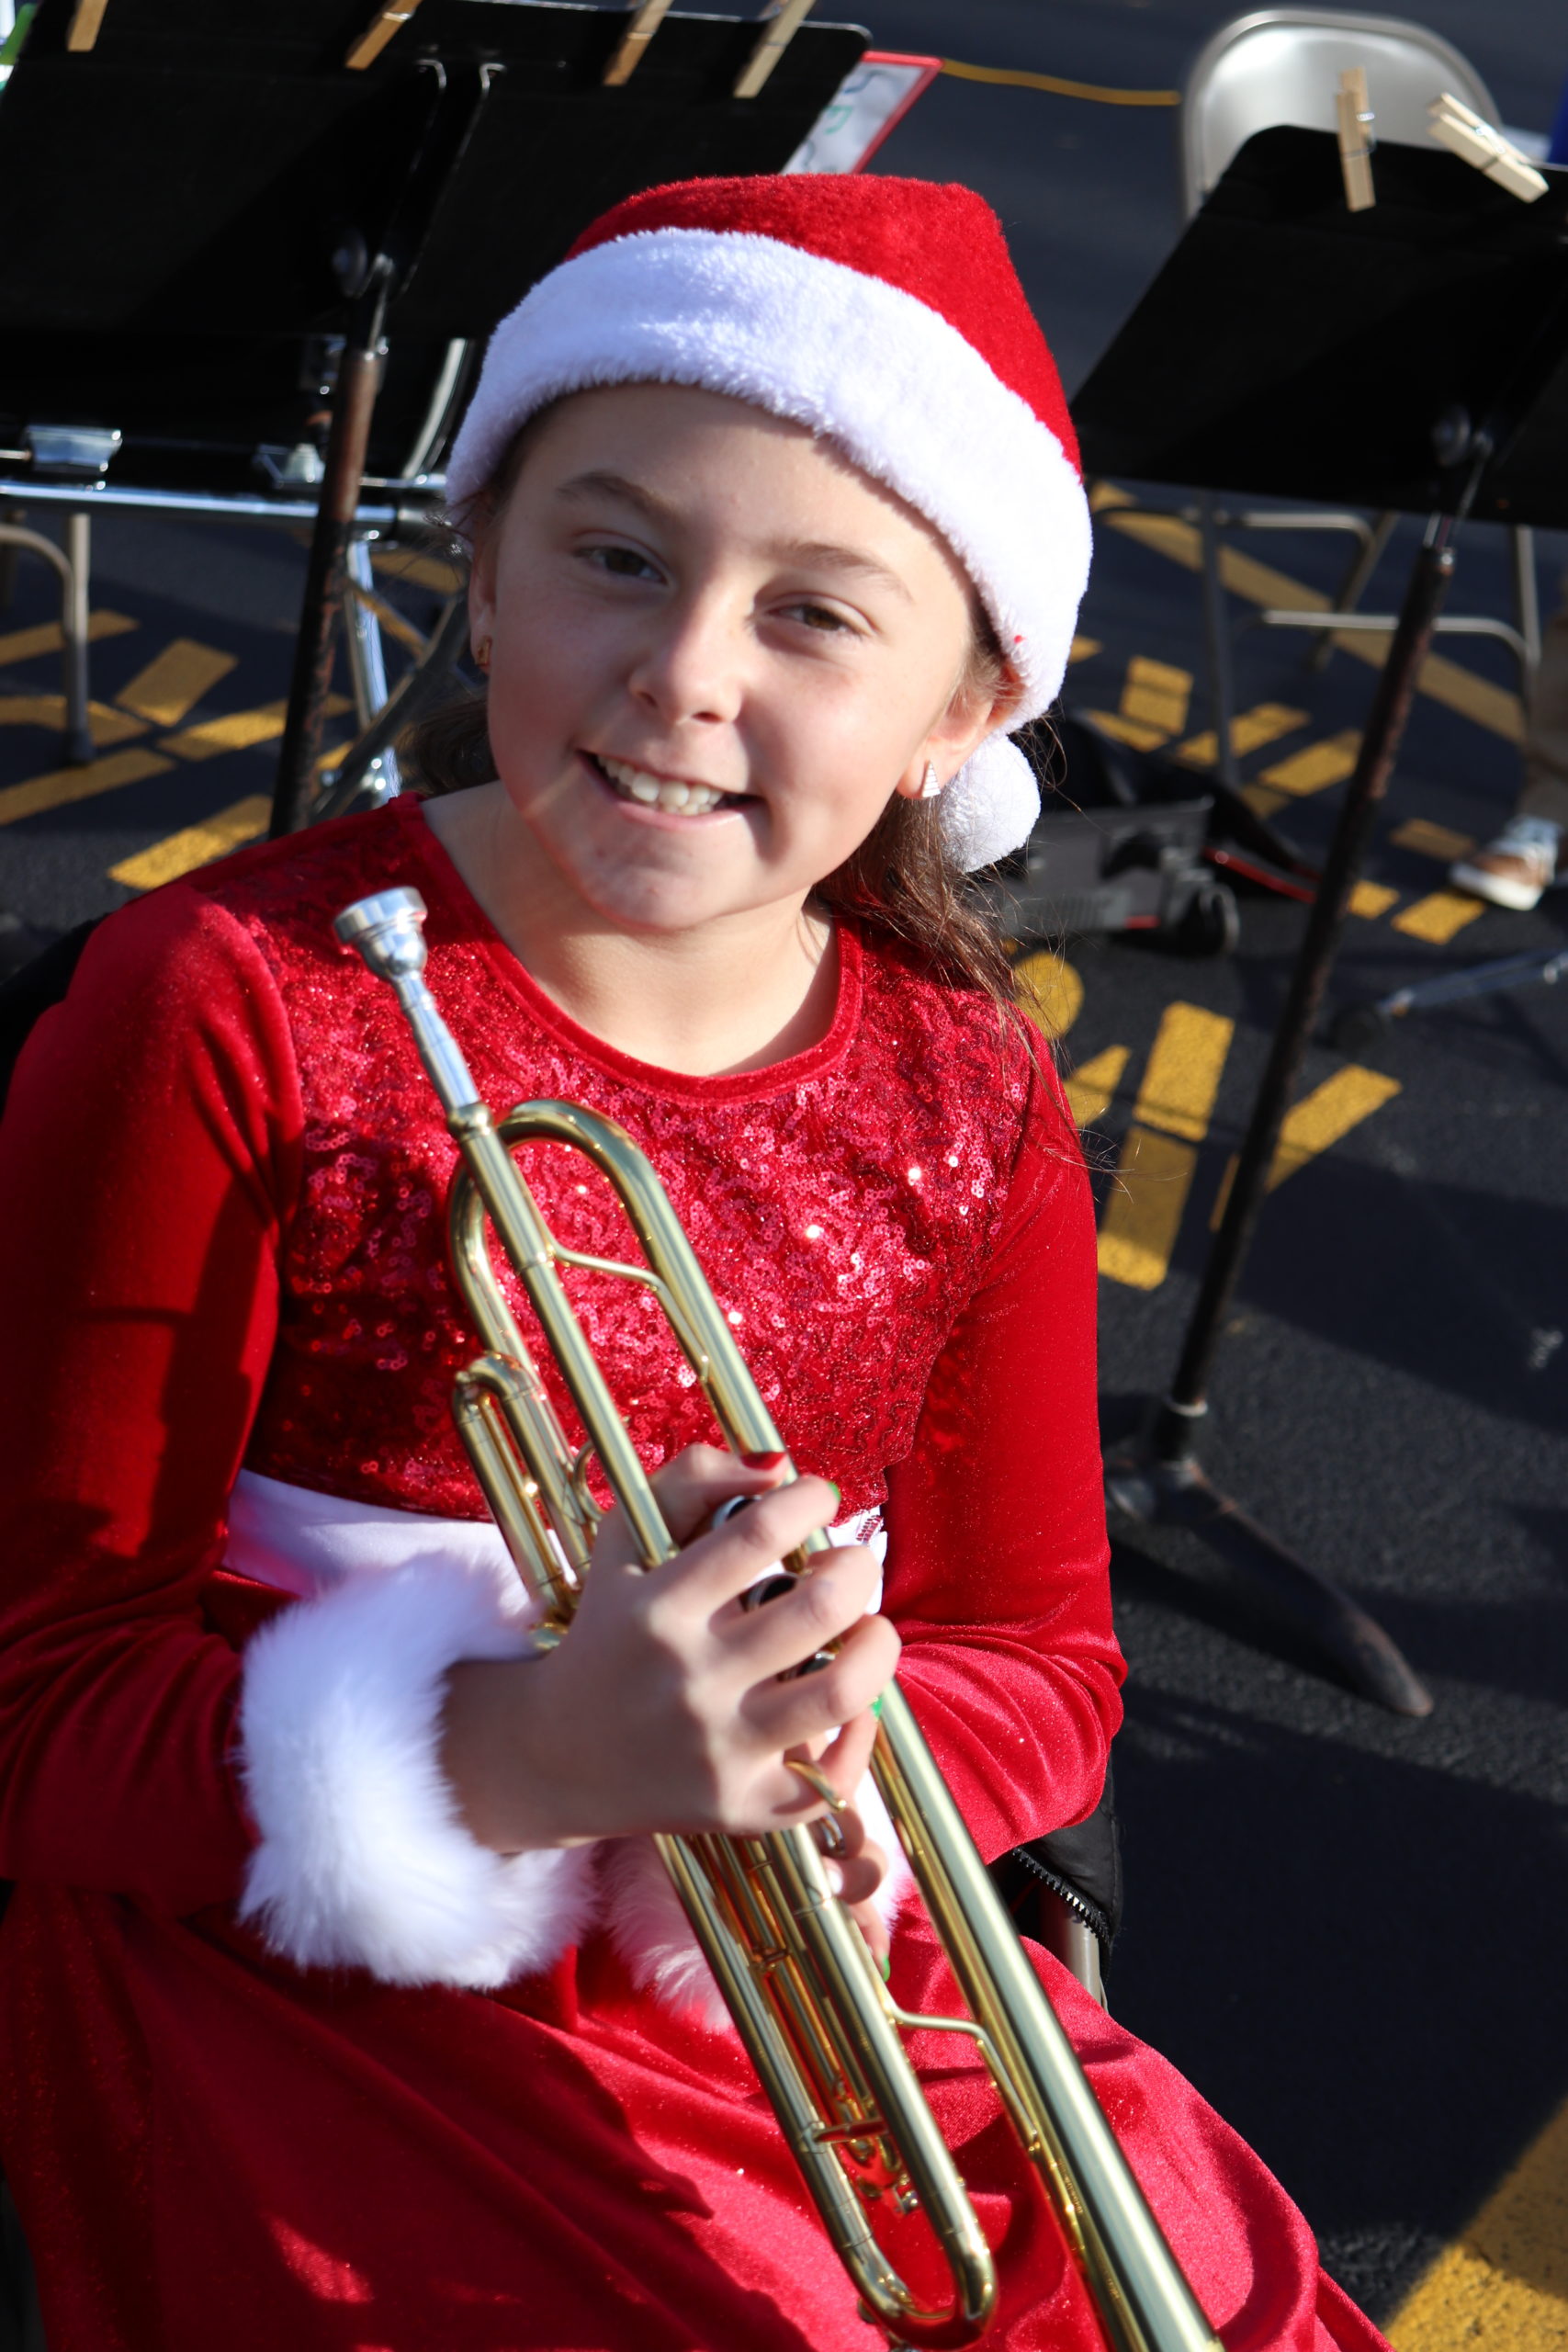 Raynor Country Day School recently hosted a series of winter concerts showcasing the vocal and instrumental talents of students. Sixth-grader Finnley Coonan prepares for her solo.